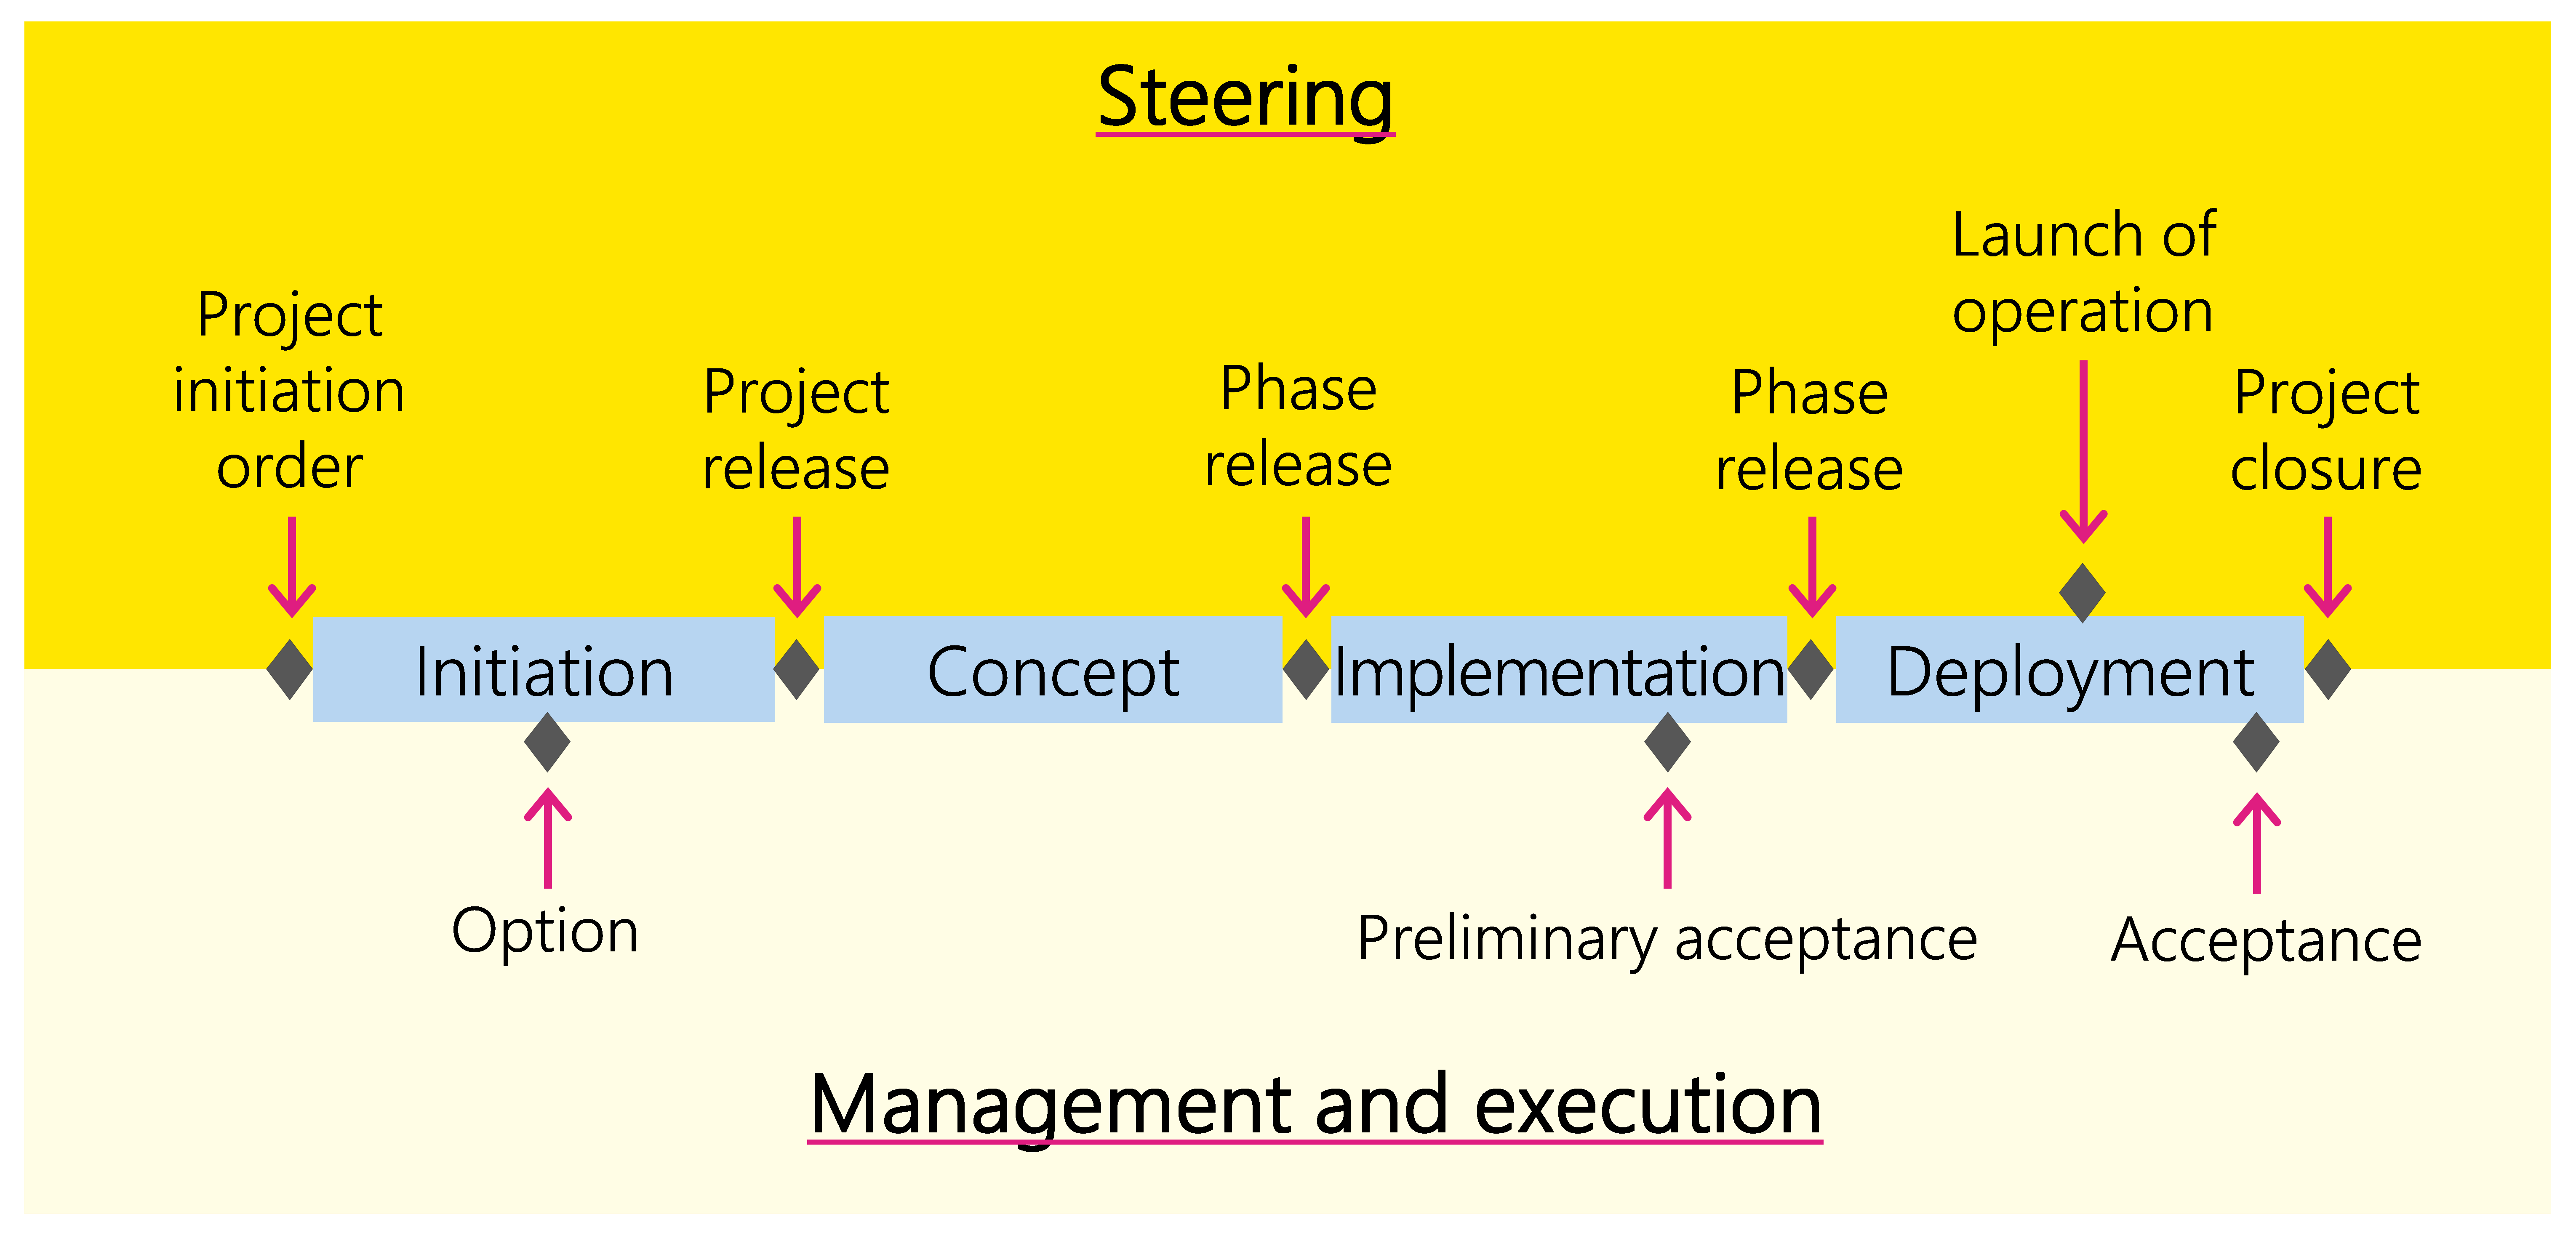 Figure 10: Phases and milestones of the service/product scenario